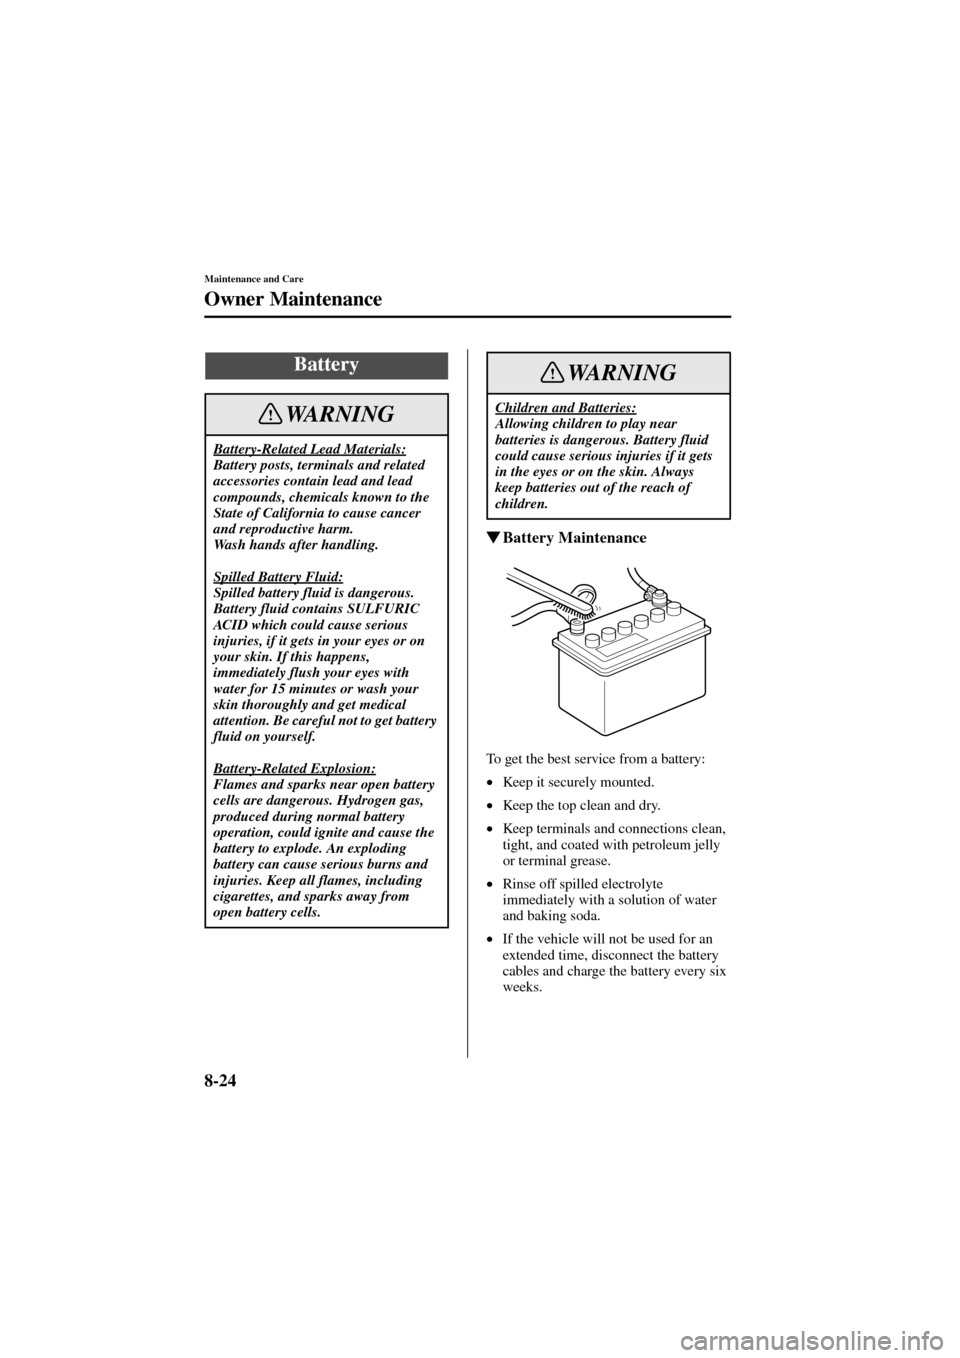 MAZDA MODEL 6 2004  Owners Manual (in English) 8-24
Maintenance and Care
Owner Maintenance
Form No. 8R29-EA-02I
Battery Maintenance
To get the best service from a battery:
•
Keep it securely mounted.
•
Keep the top clean and dry.
•
Keep ter